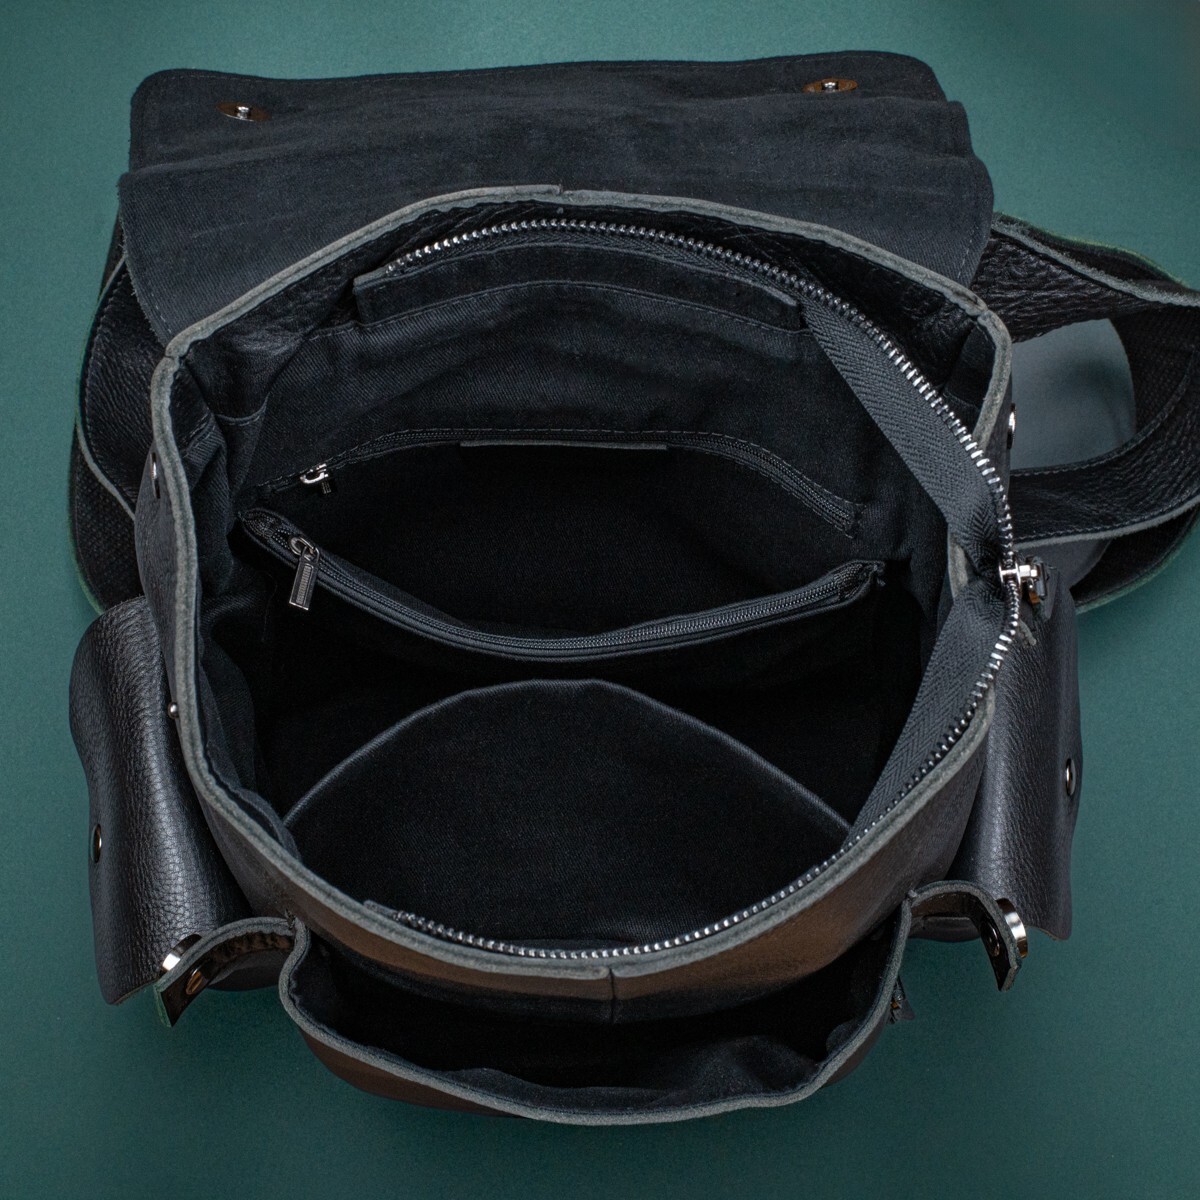 [ new goods ] original leather rucksack backpack bag Day Pack bag bag cow leather leather unused free shipping 1 jpy black black rice field middle leather .